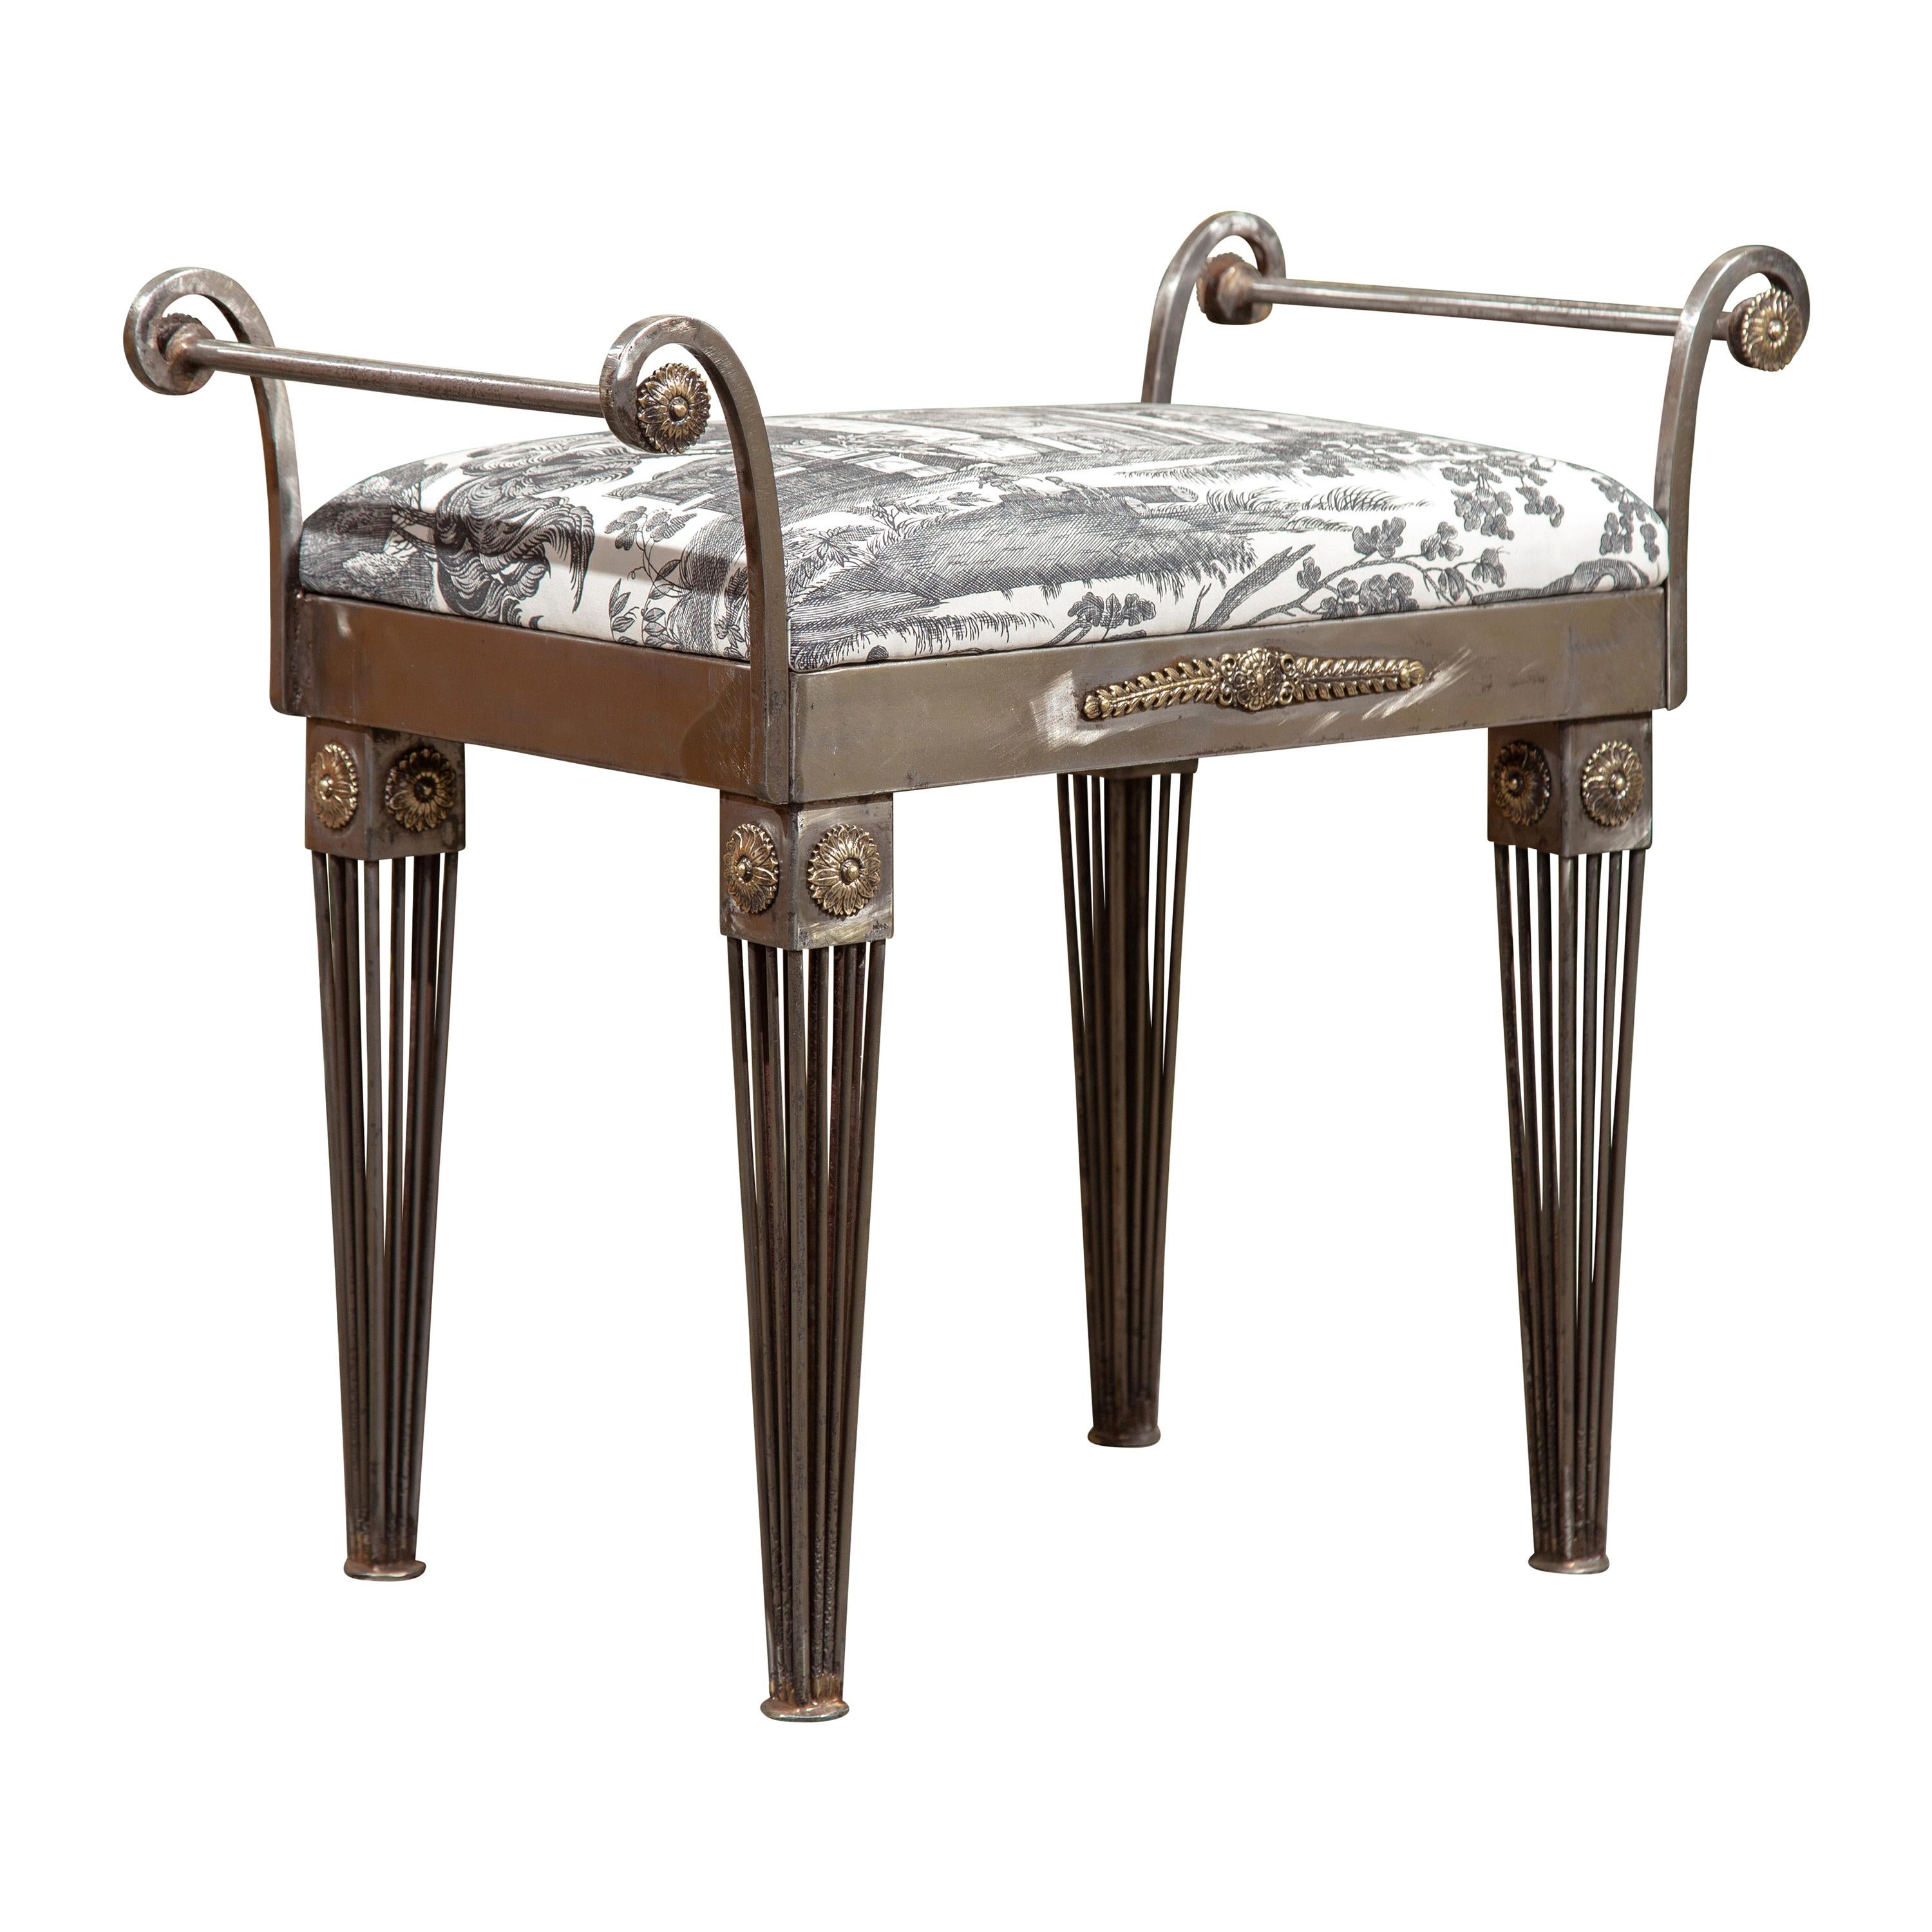 French 1930s Steel Bench with Out-Scrolling Arms, Tapered Legs and Toile Fabric